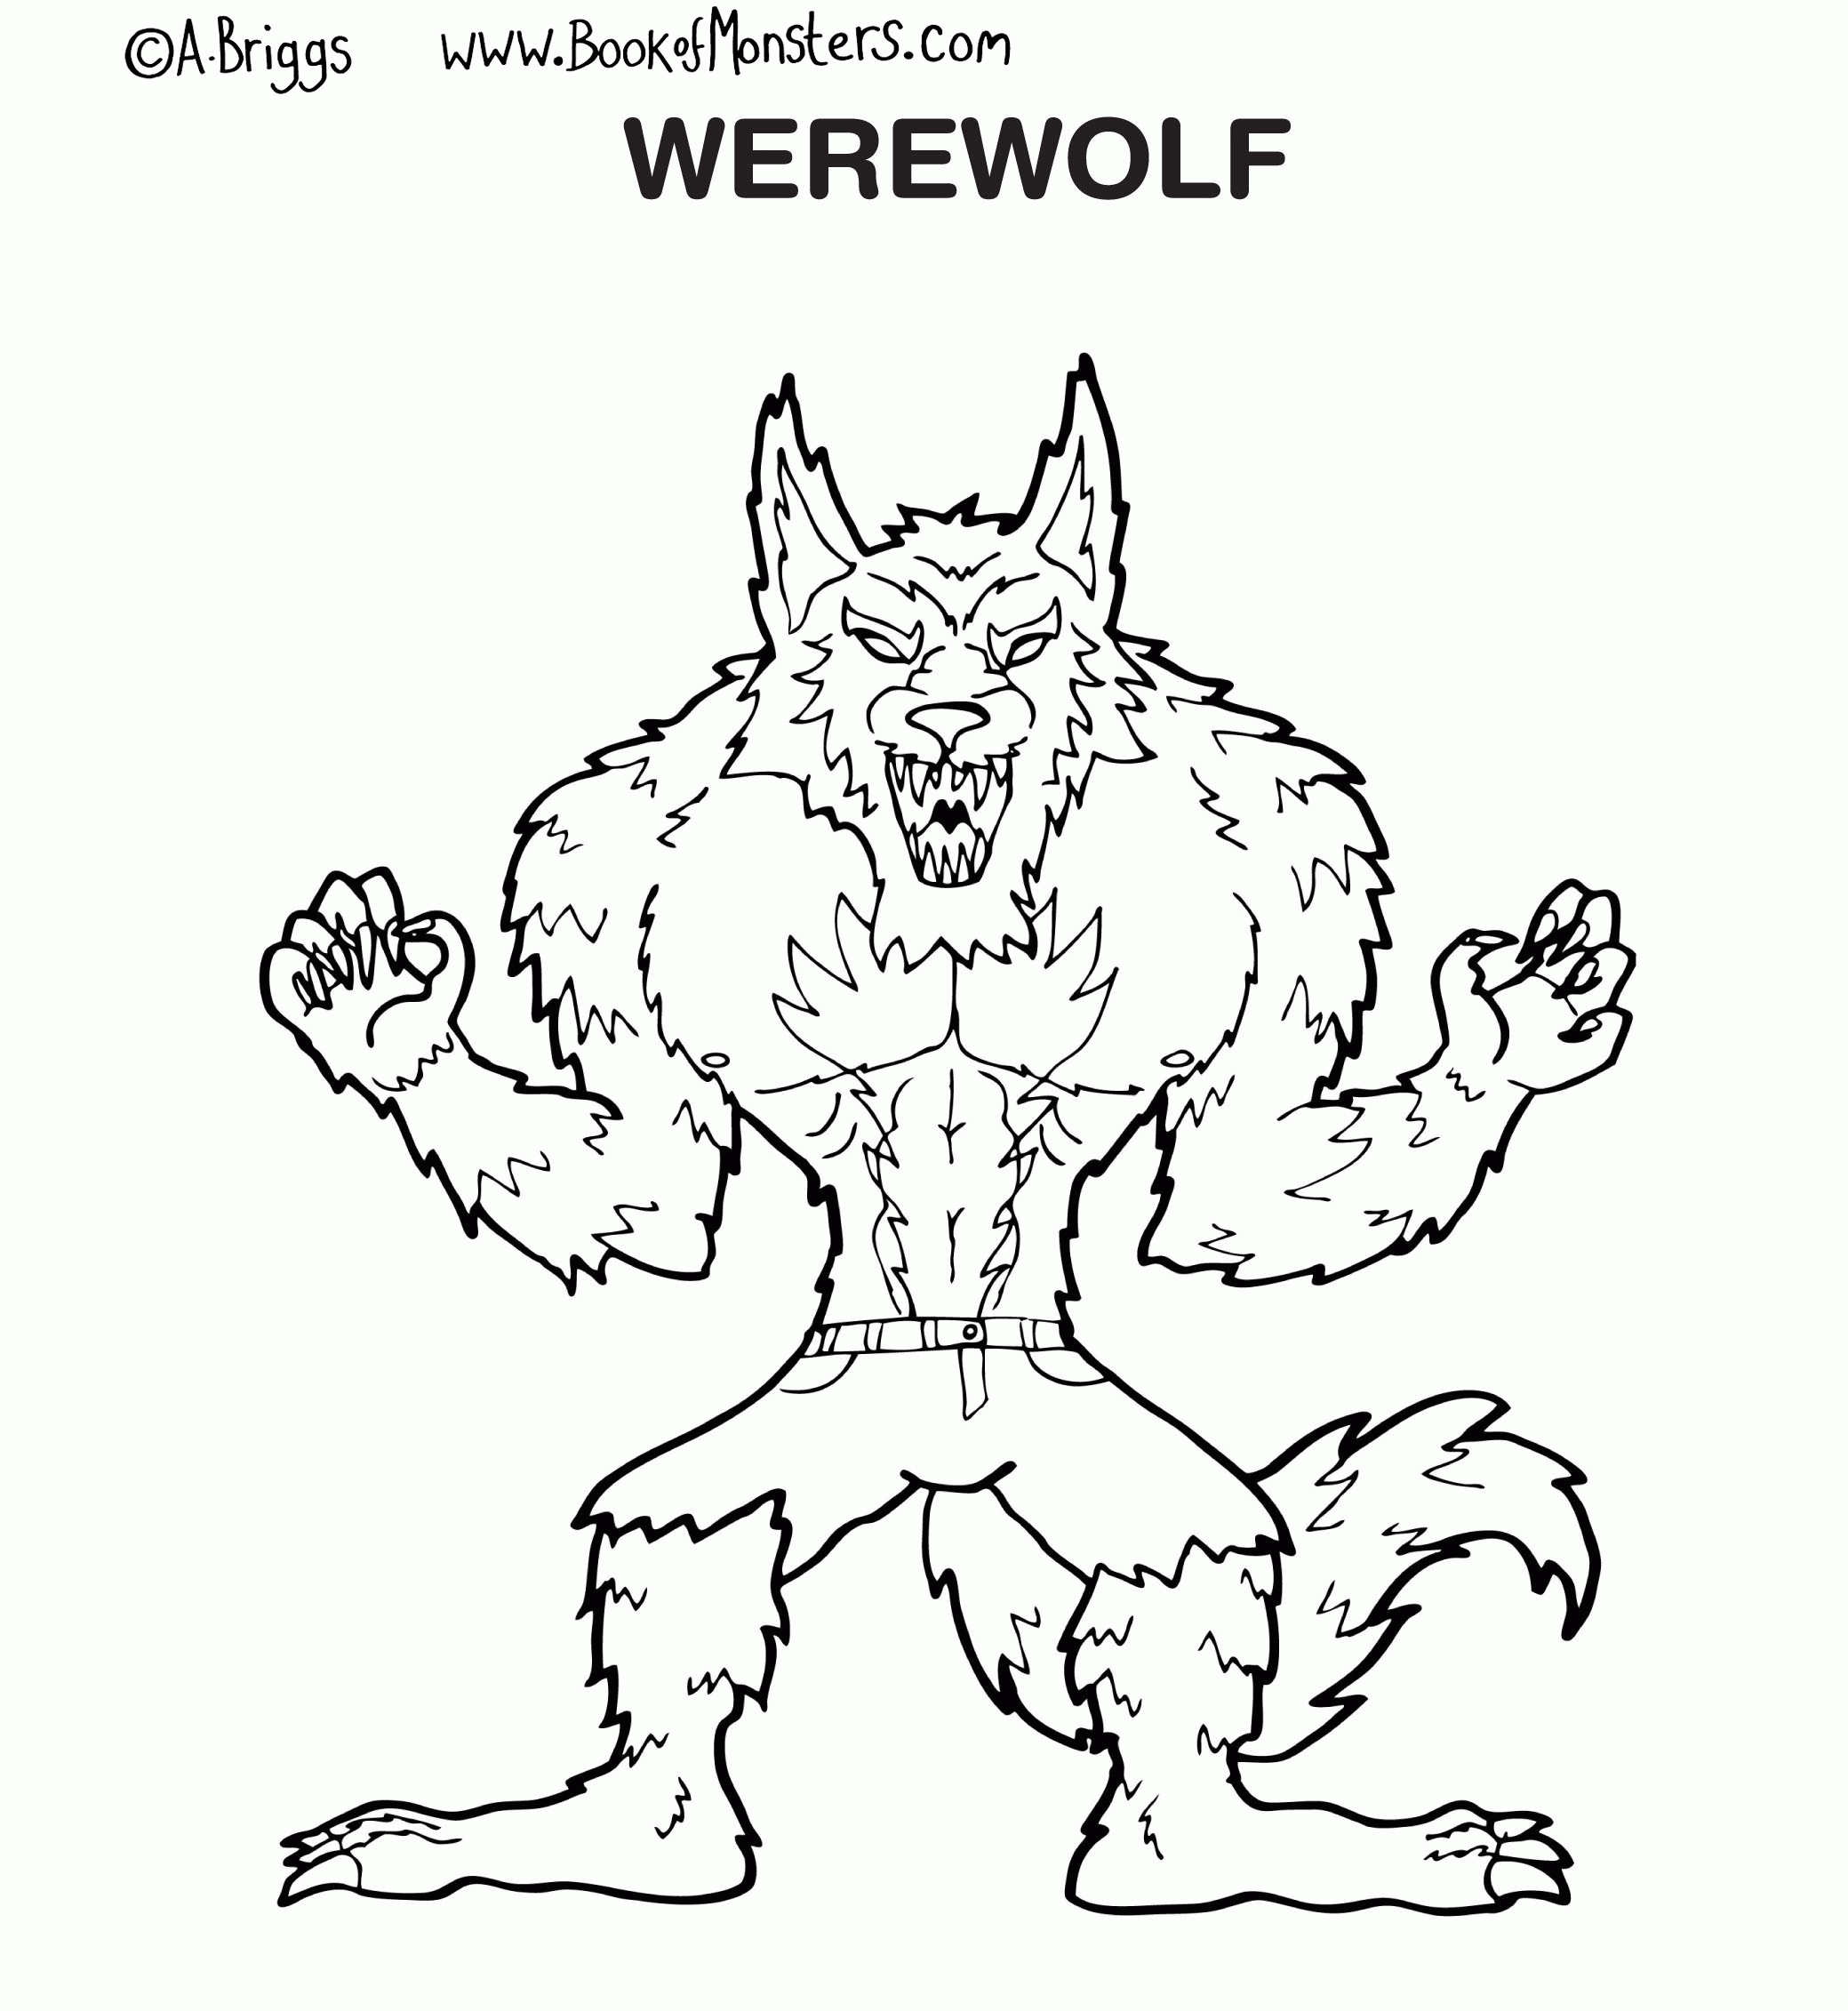 10 Pics of Werewolf Coloring Pages Free Printables - Werewolf Ben ...